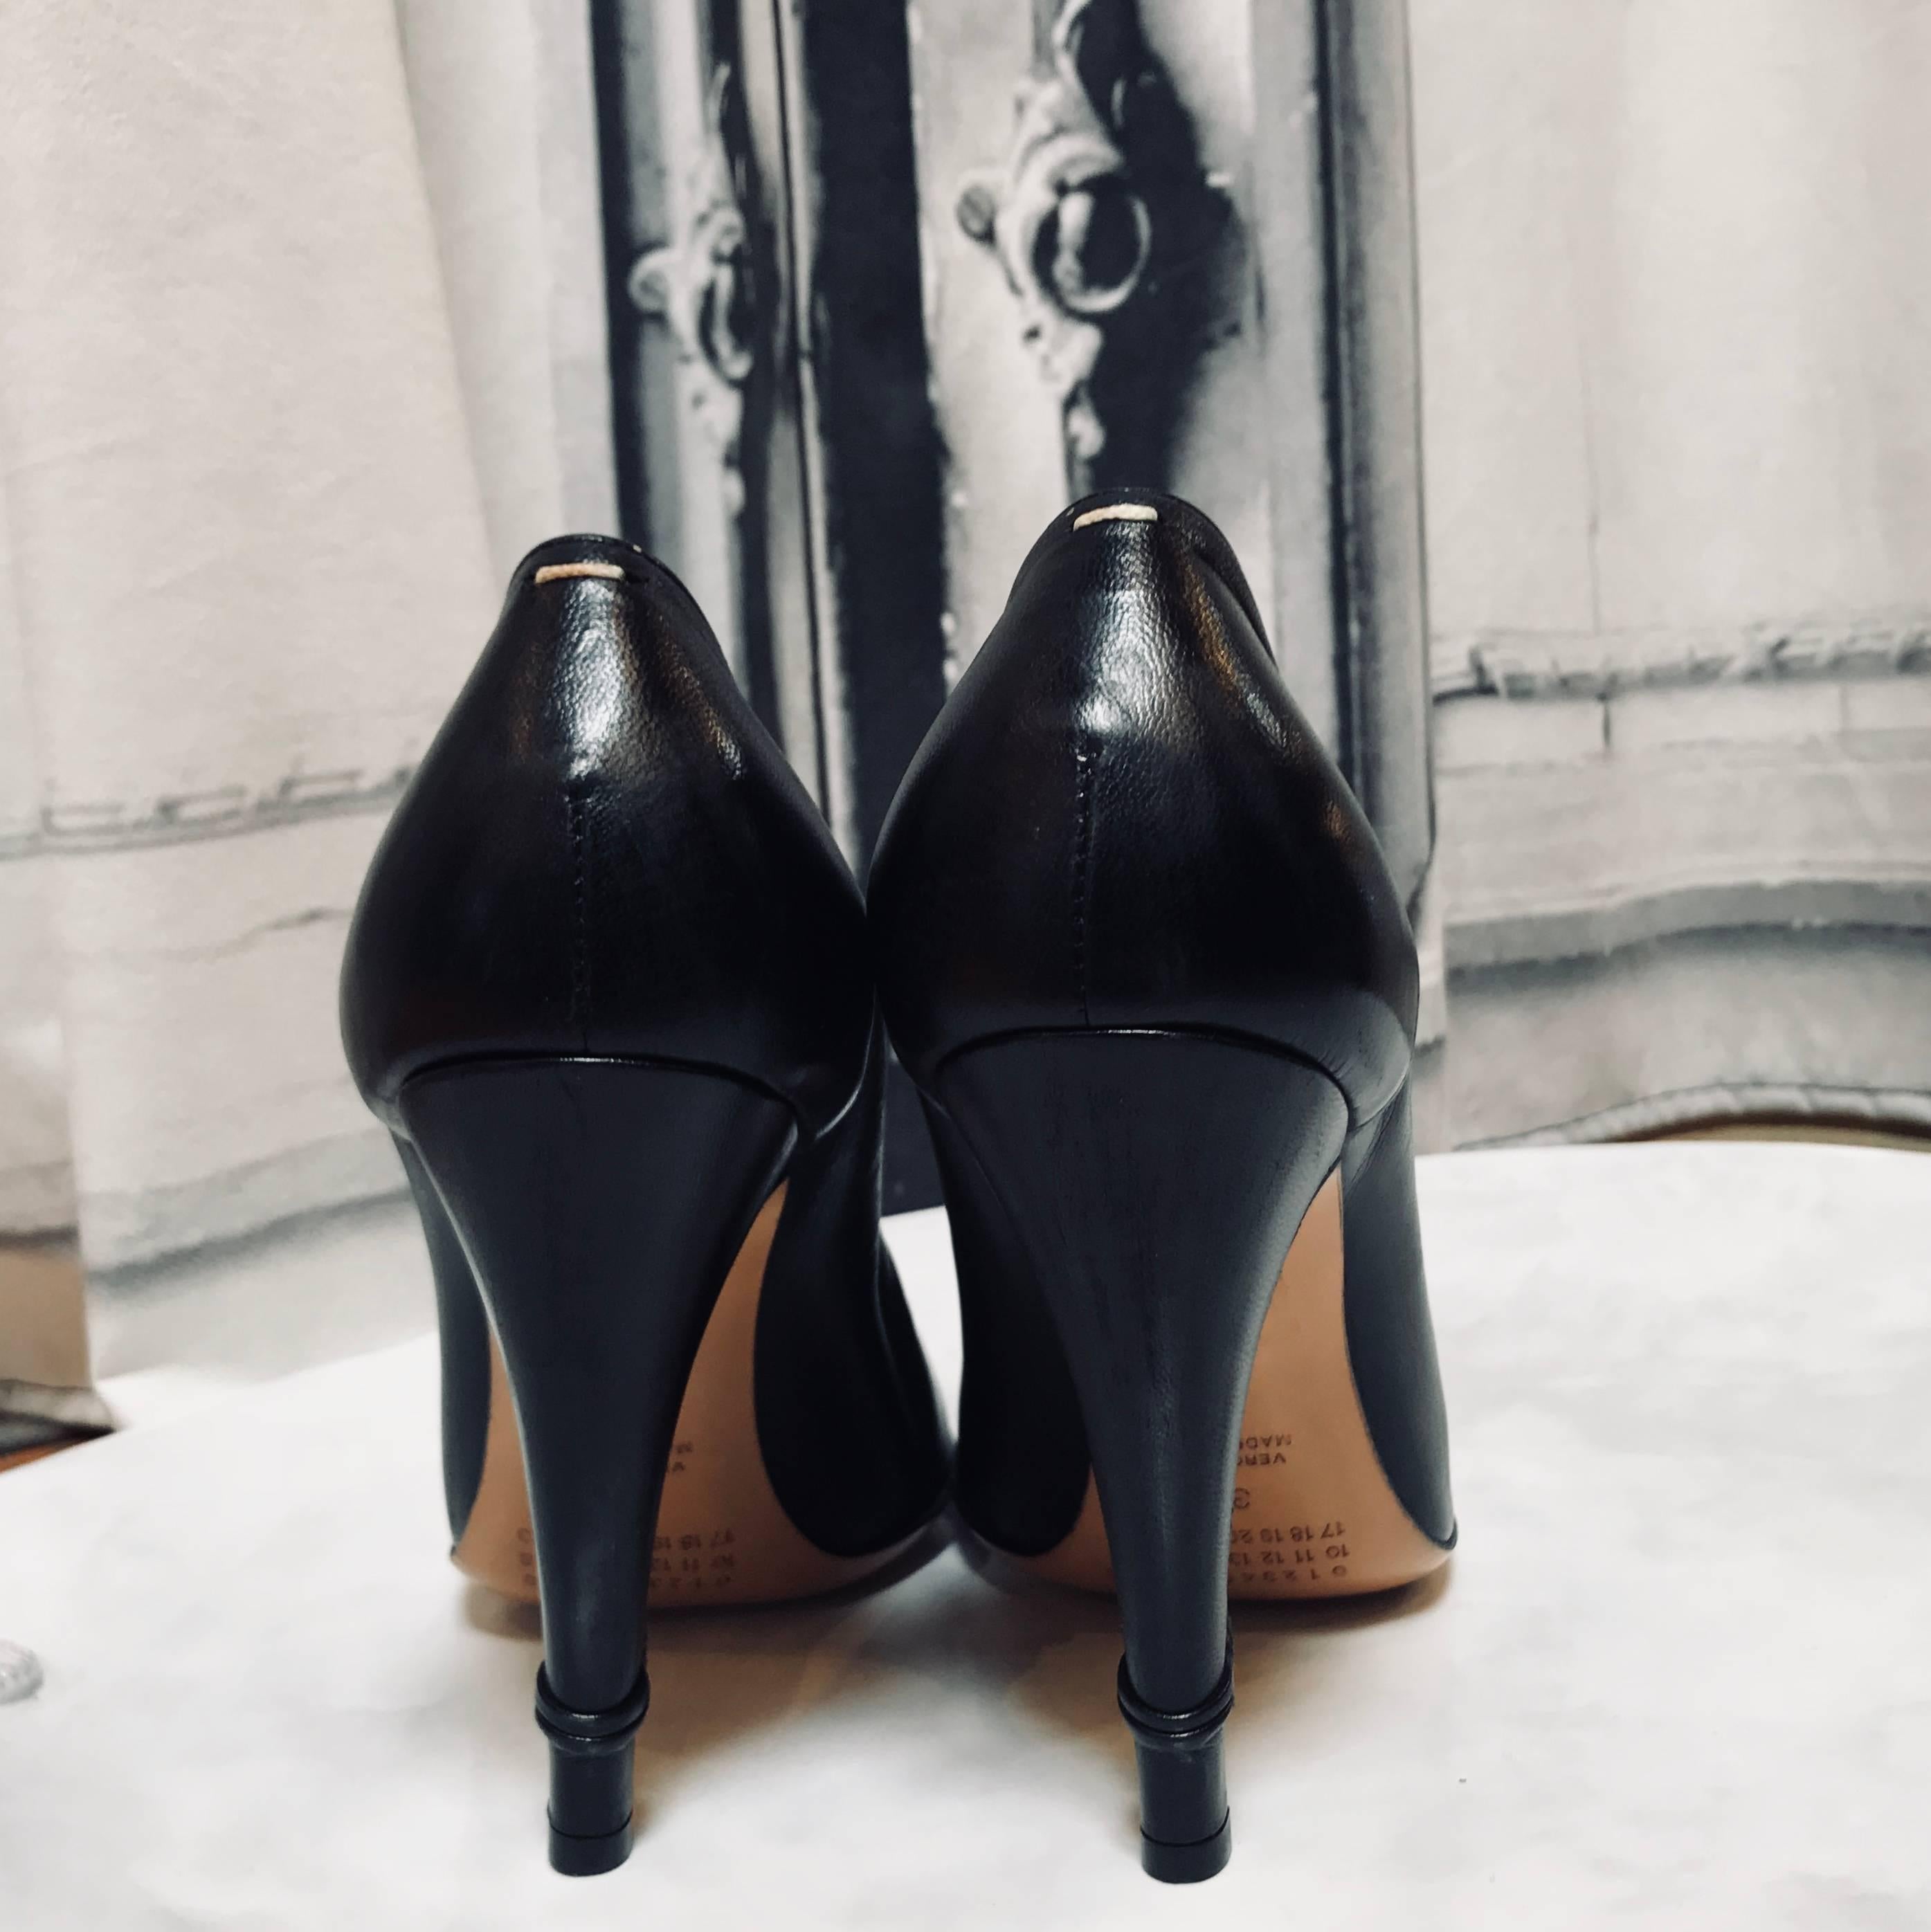 2005 Maison Martin Margiela 'After Party Pumps' New in Box. Destroyed look, as after a long night of partying. Curled up leather on the inside of the heels
Detached elastic straps on the right outer foot and front of the left foot. Shaved leather